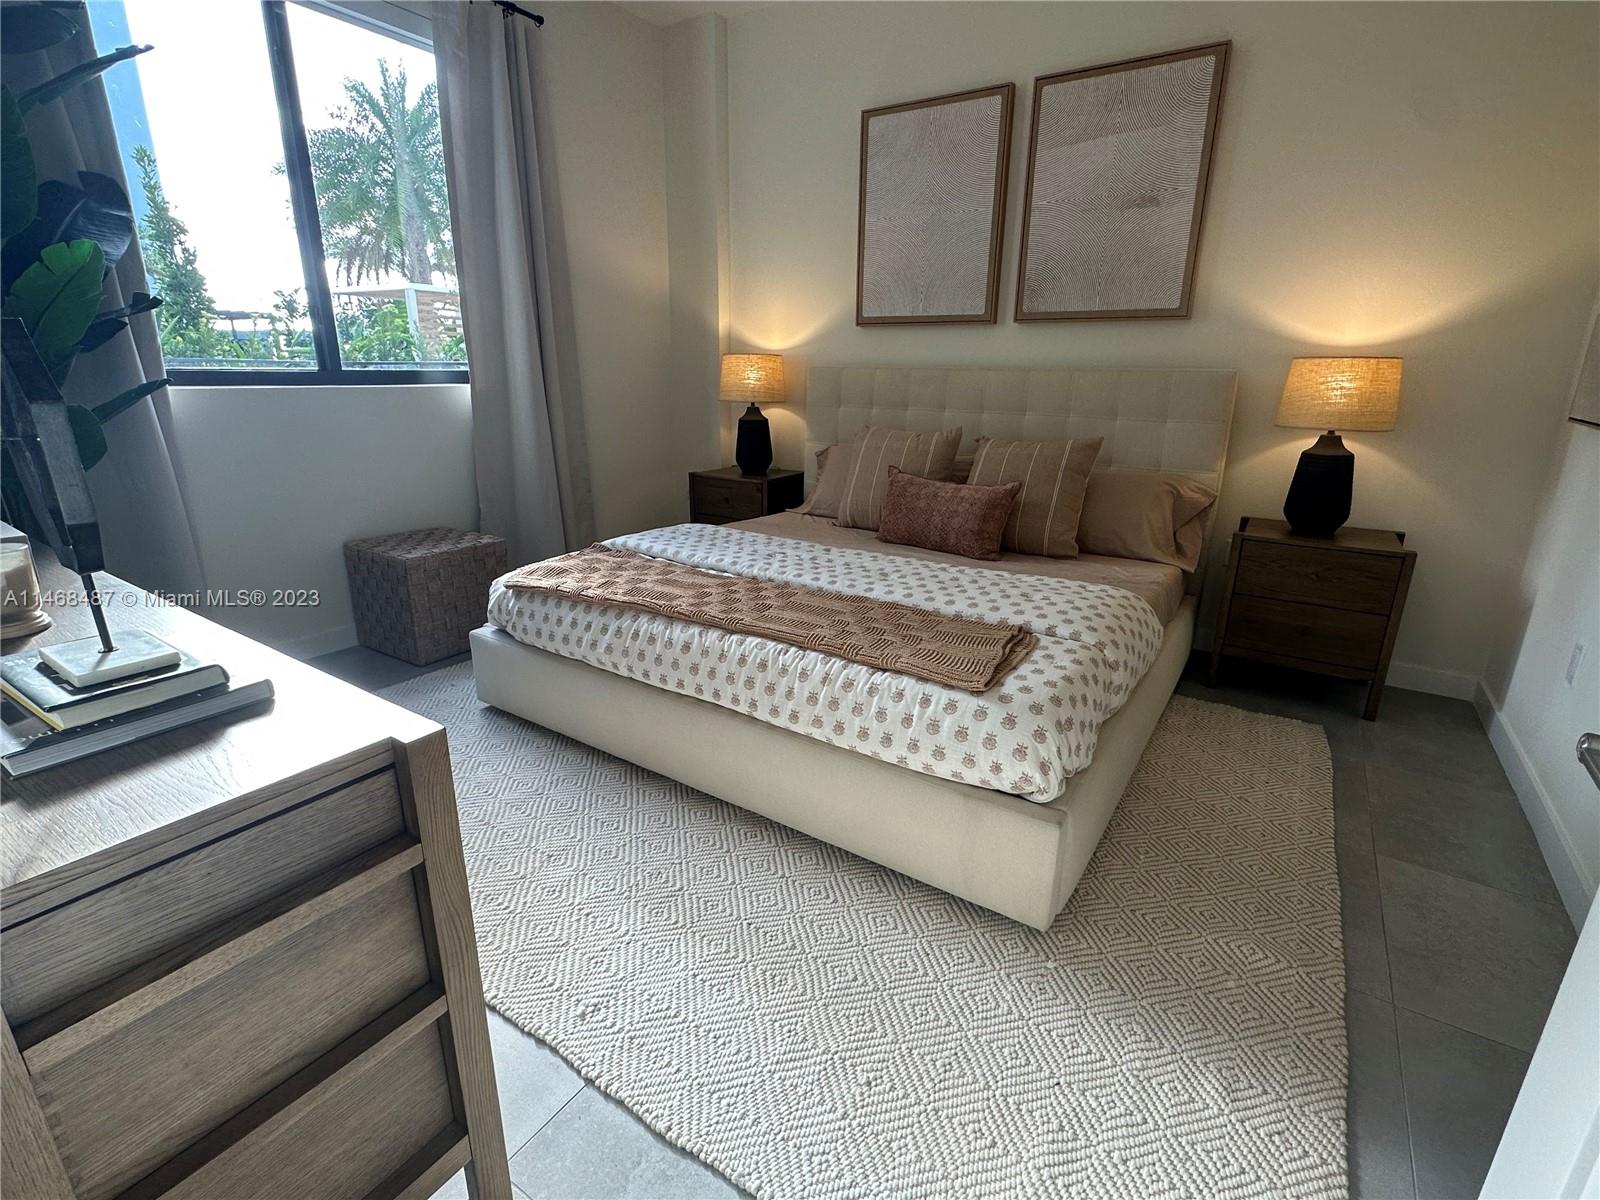 16395 Biscayne Blvd 1110, North Miami Beach, Florida 33160, 3 Bedrooms Bedrooms, ,2 BathroomsBathrooms,Residentiallease,For Rent,16395 Biscayne Blvd 1110,A11468487